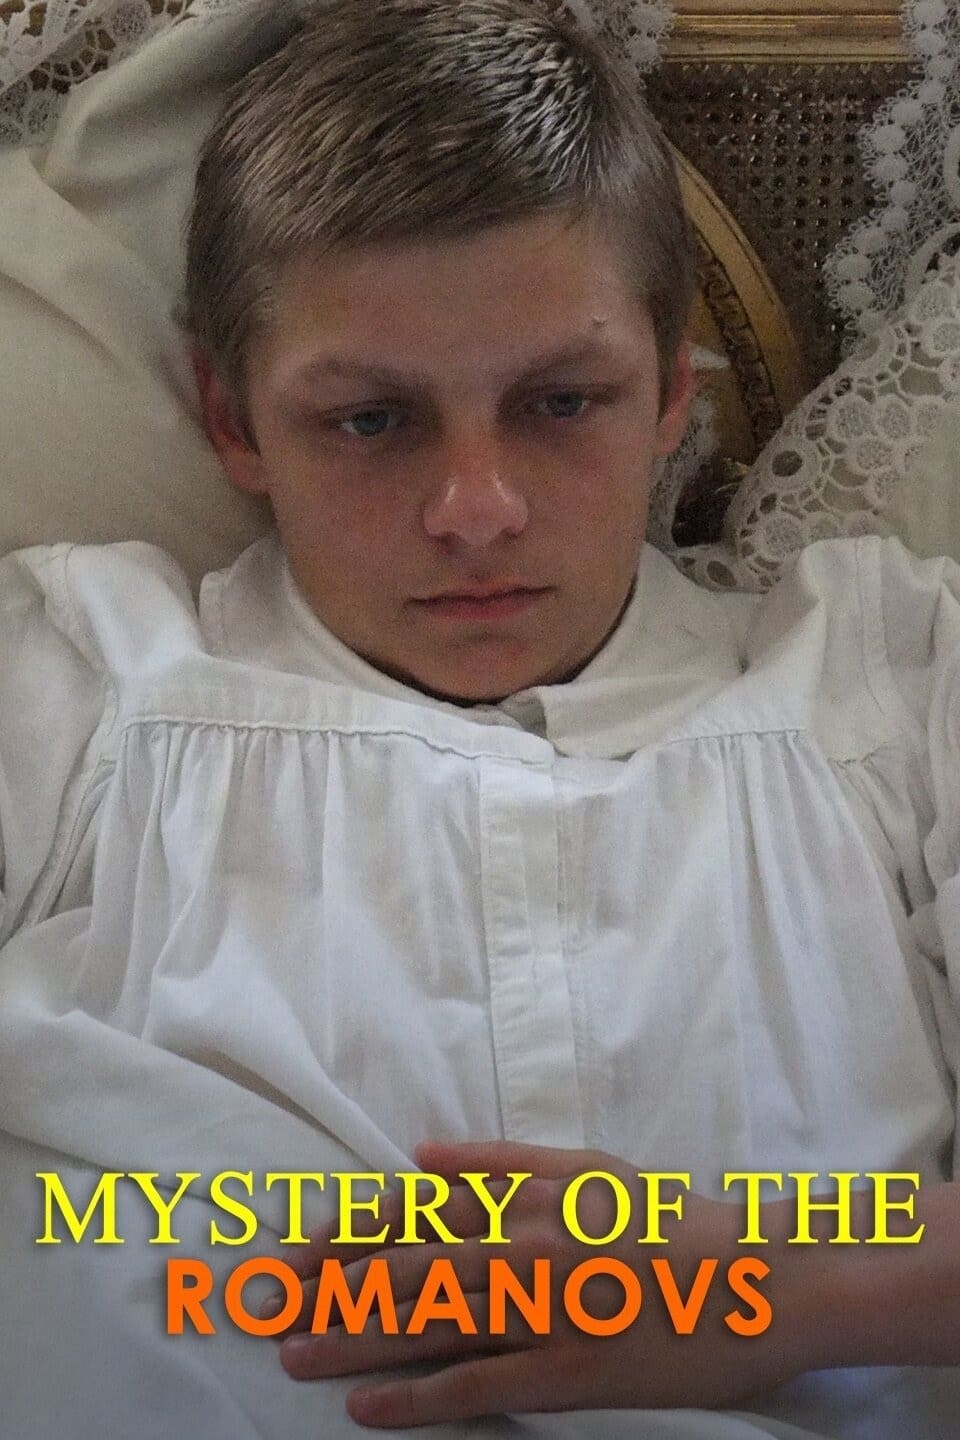 National Geographic Presents: Mystery of the Romanovs